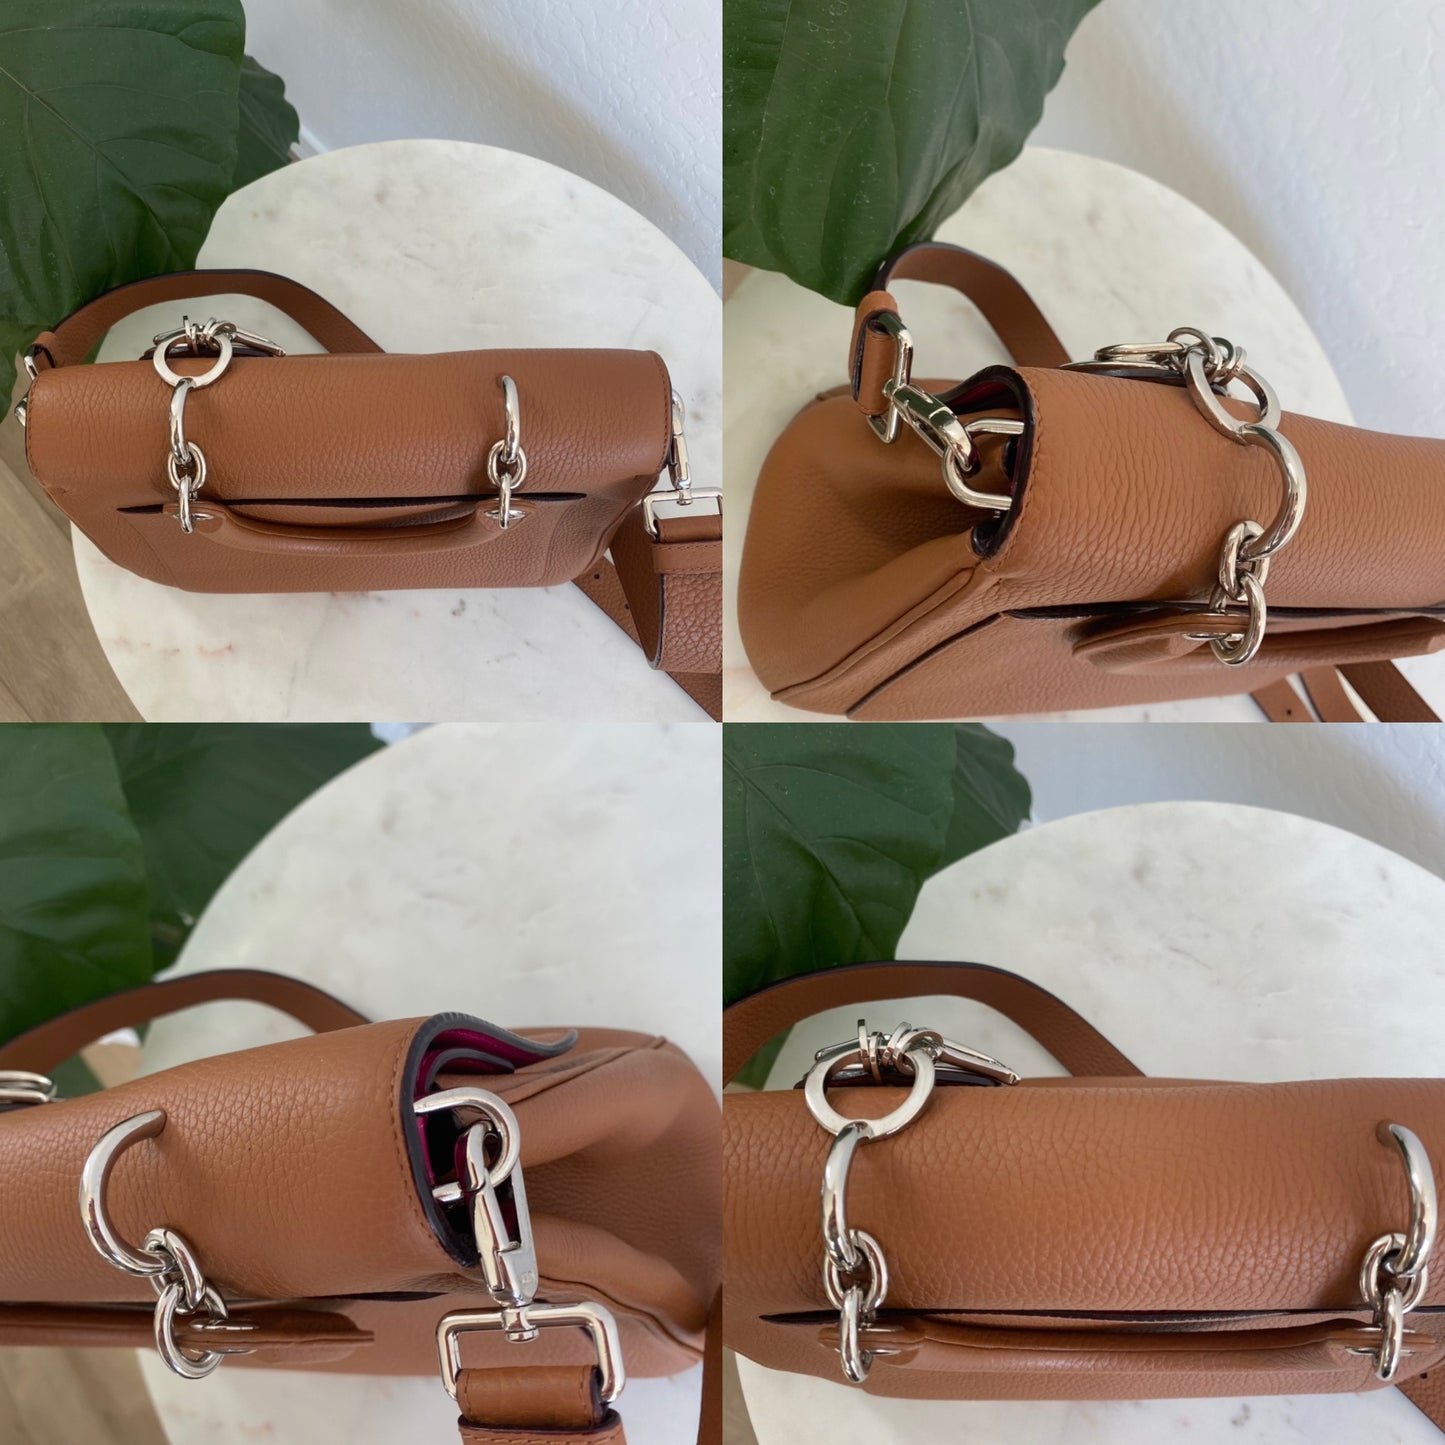 Christian Dior Be Dior Leather Satchel